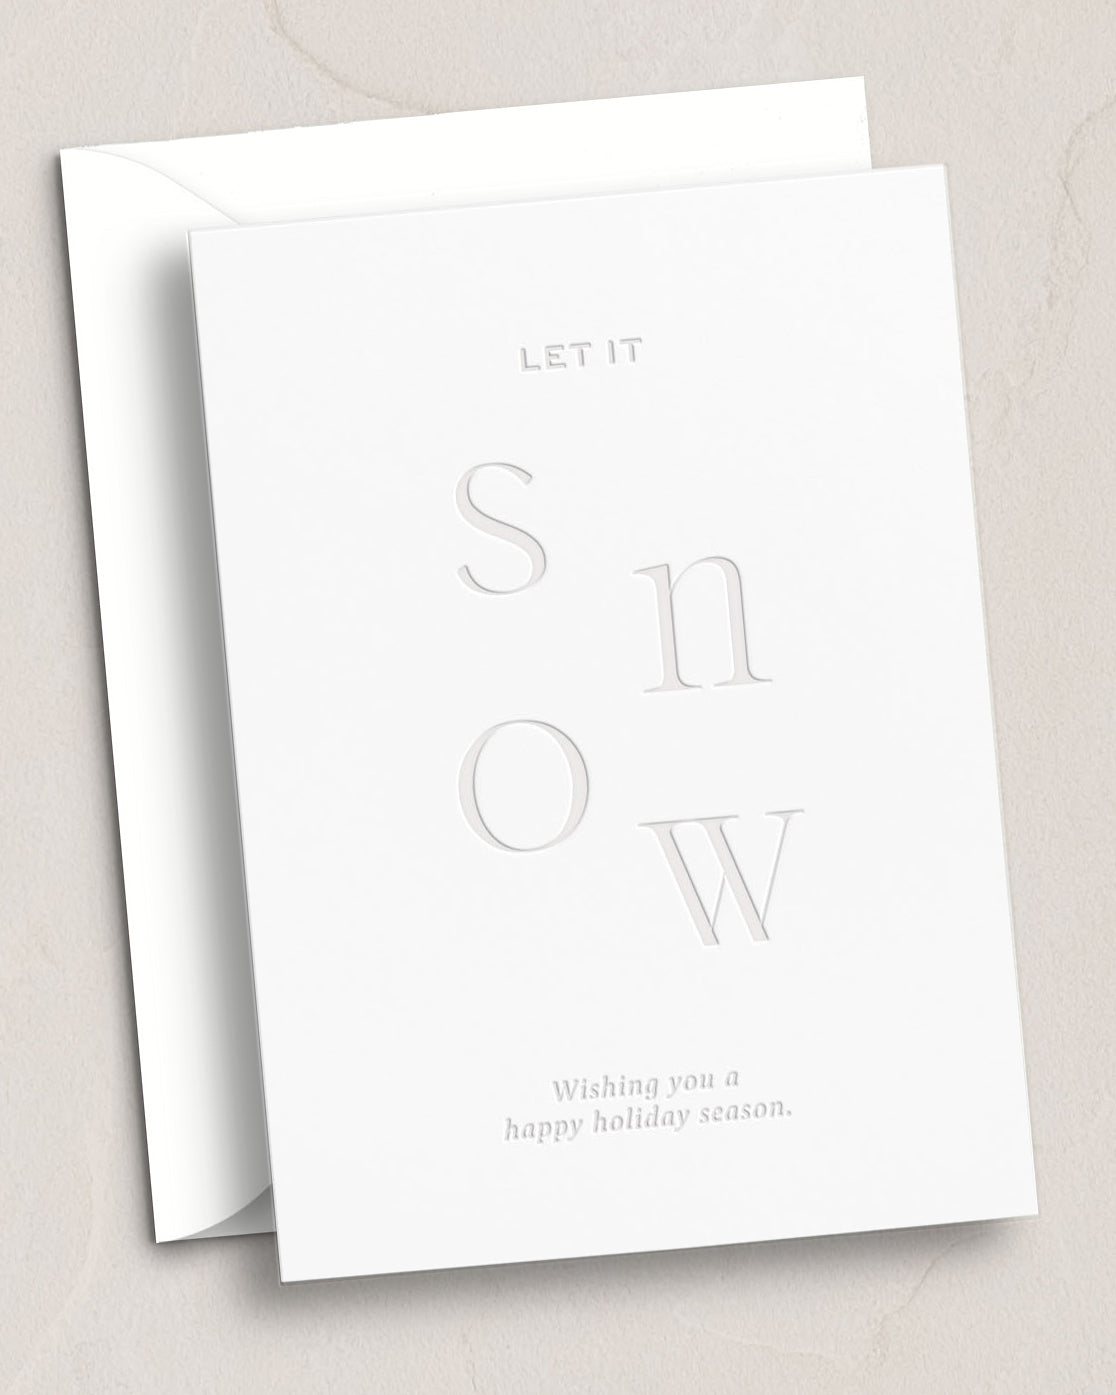 Let It Snow Letterpress Holiday Card from Leighwood Design Studio